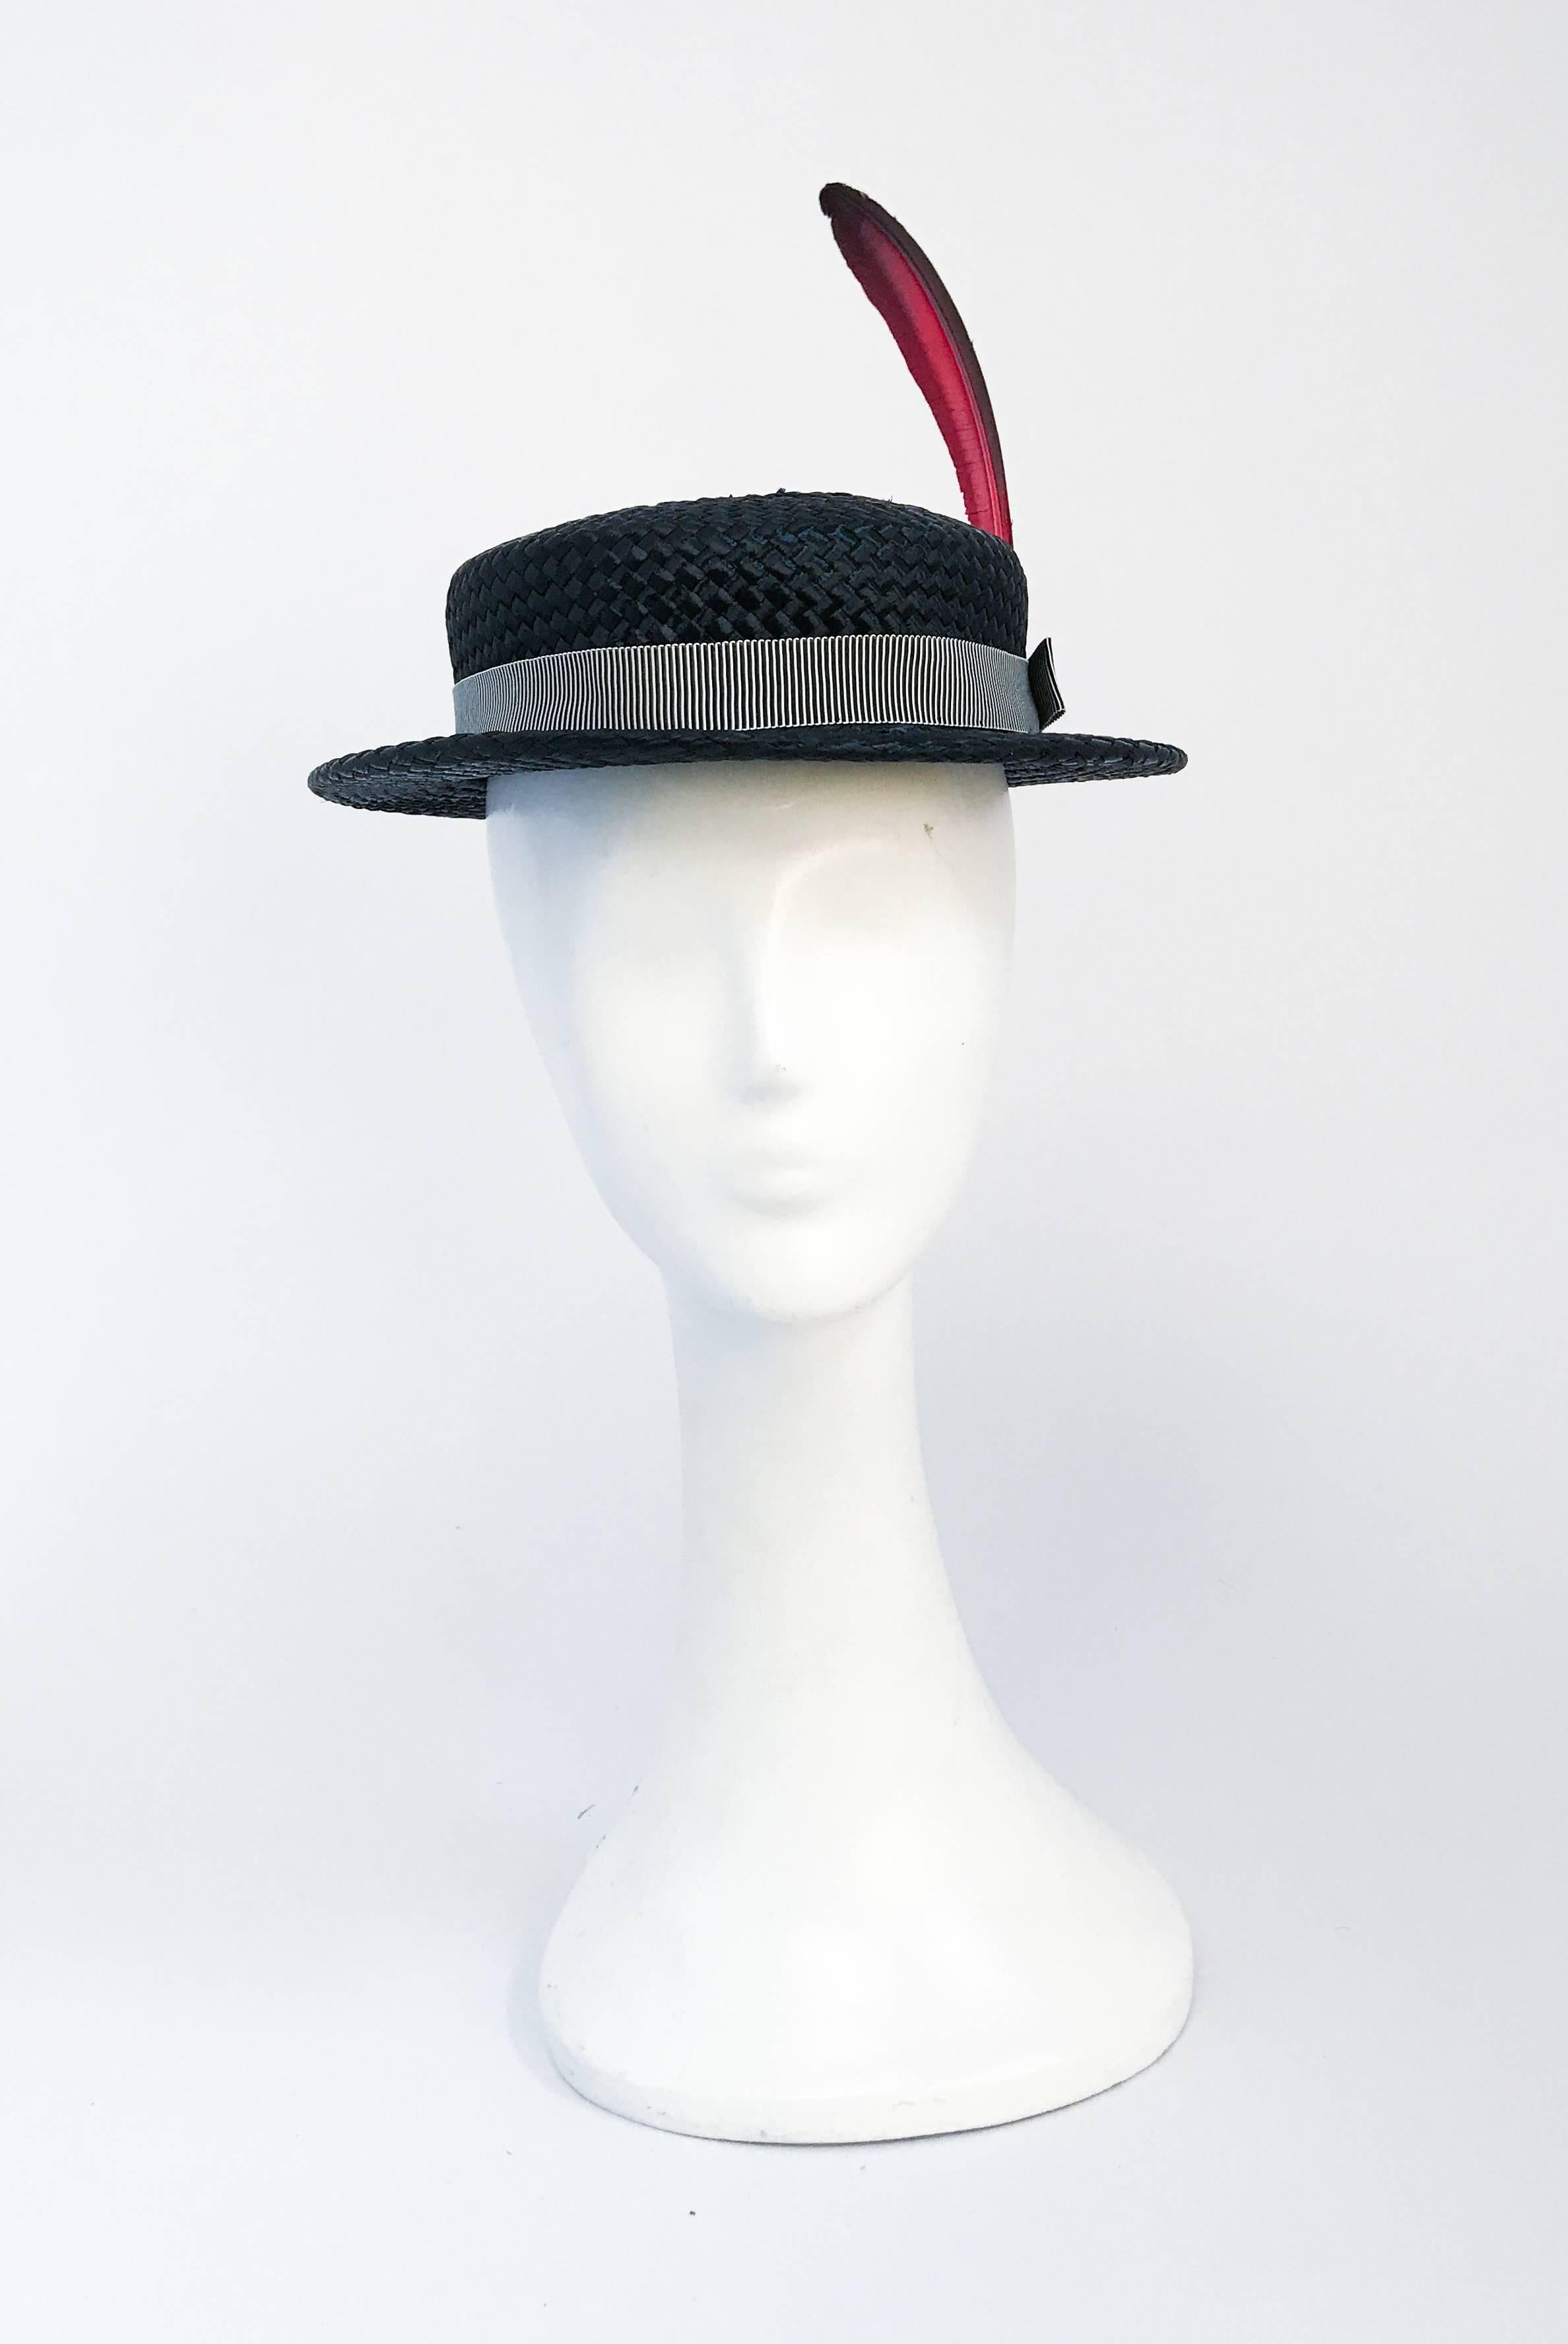 1940s Black Woven Straw Hat with Large Feather Accent. Black woven straw hat with black and white hat band and elongated red/black hand dyed feather accent. Open-sized.